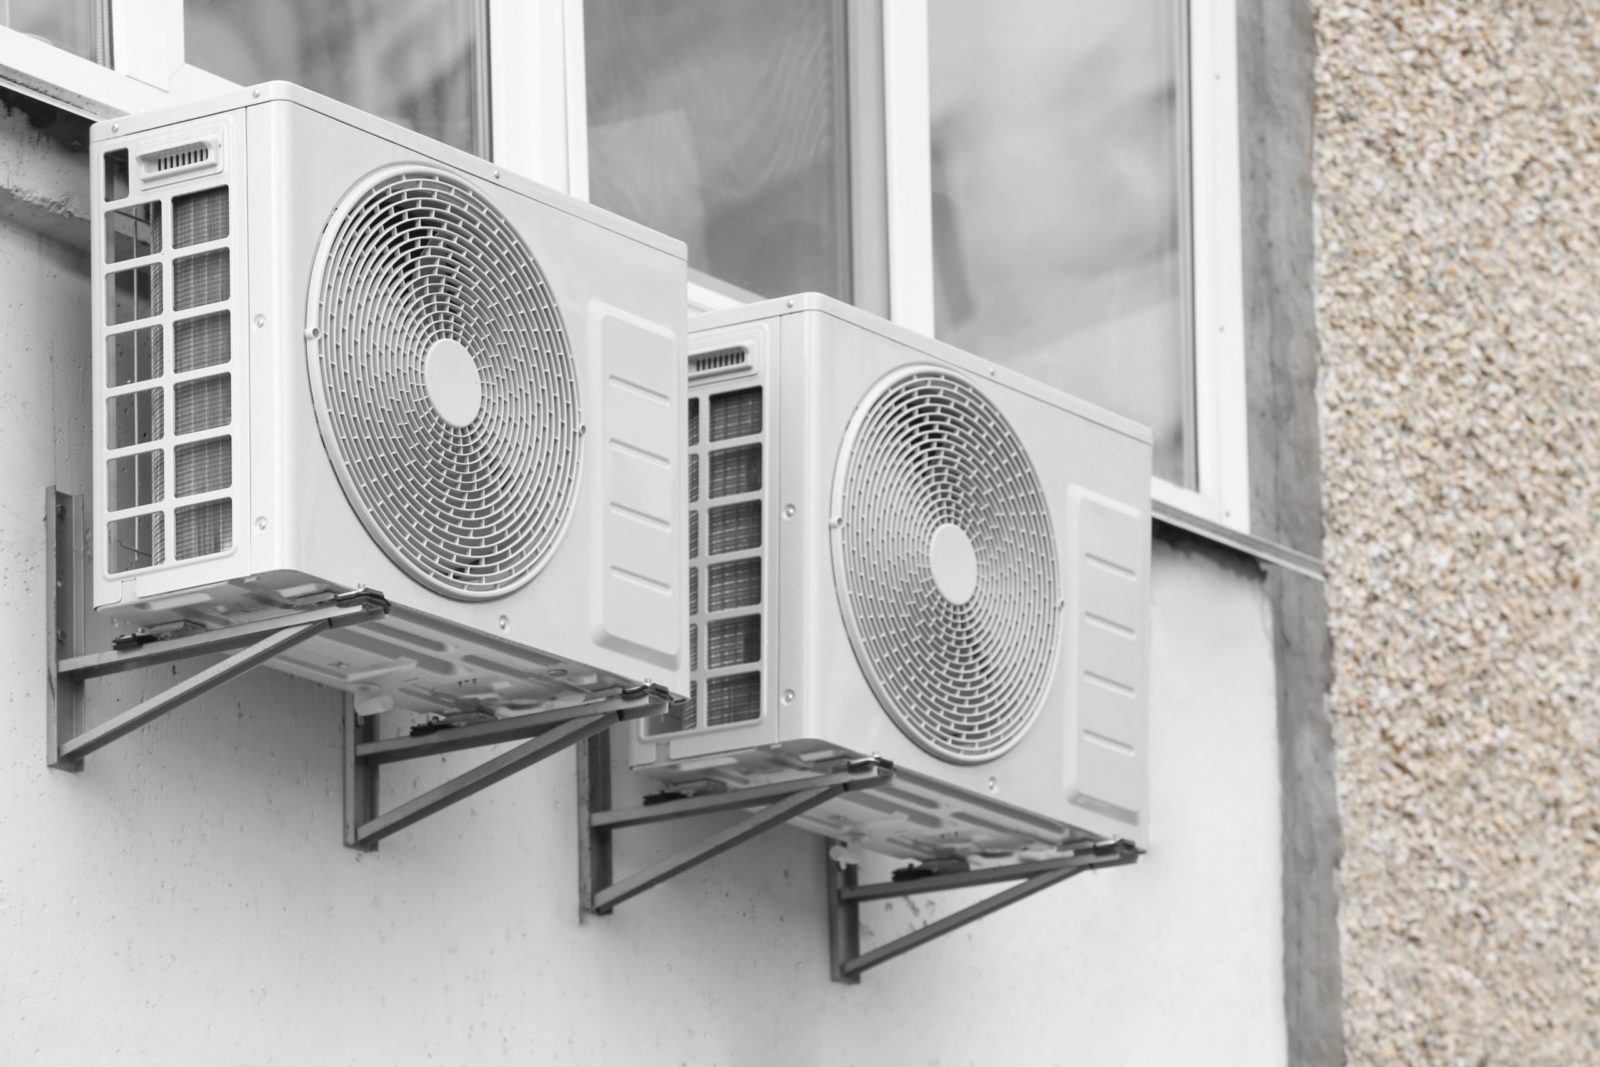 Air conditioners on exterior wall